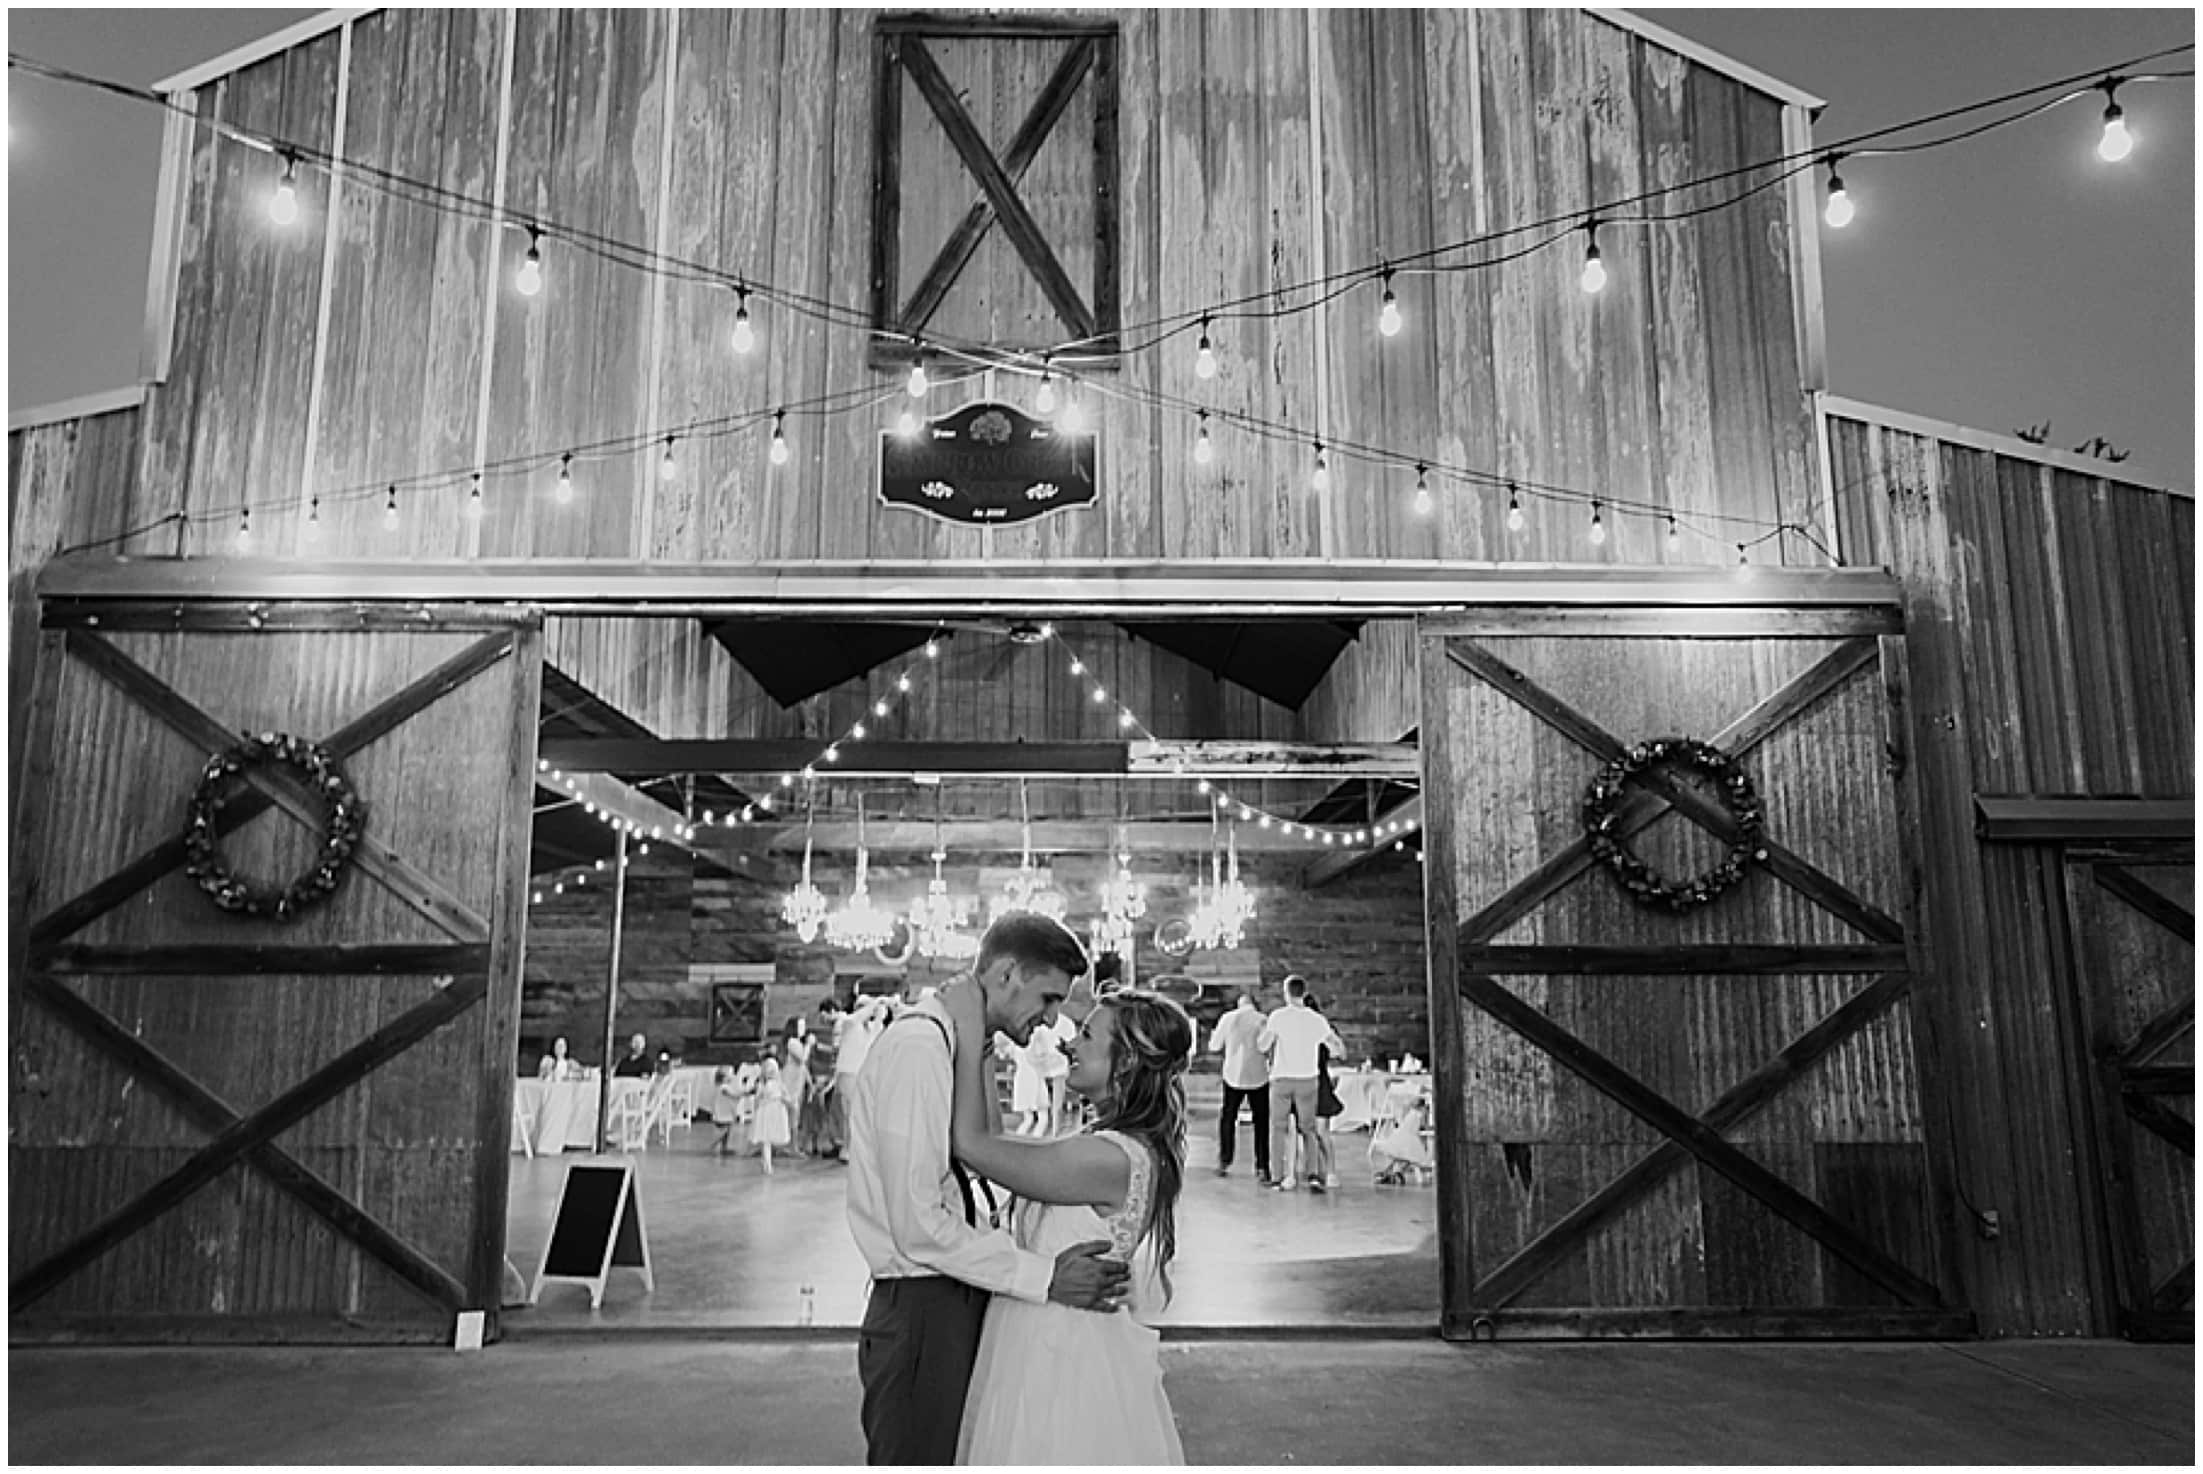 bride and groom kiss in front of the venue barn, Brit Nicole Photography, West Texas Barn Wedding, West Texas Small Wedding, West Texas wedding venue, DJ Platinum, Vera Wang engagement ring, Zales Manly Bands wedding ring, David's Bridal wedding dress, Krazy Cakes brides wedding cake, wedding cupcake, Betsey Johnson wedding high heels, Joy's Downtown Flowers wedding decor, Sparrow Creek Ranch, texas wedding ranch, places to get married in Texas, small intimate wedding, summer wedding, texas sky, bride and groom first look, first look with dad, matching bridesmaids robes, June wedding, junebug weddings, wandering weddings, the knot, best weddings